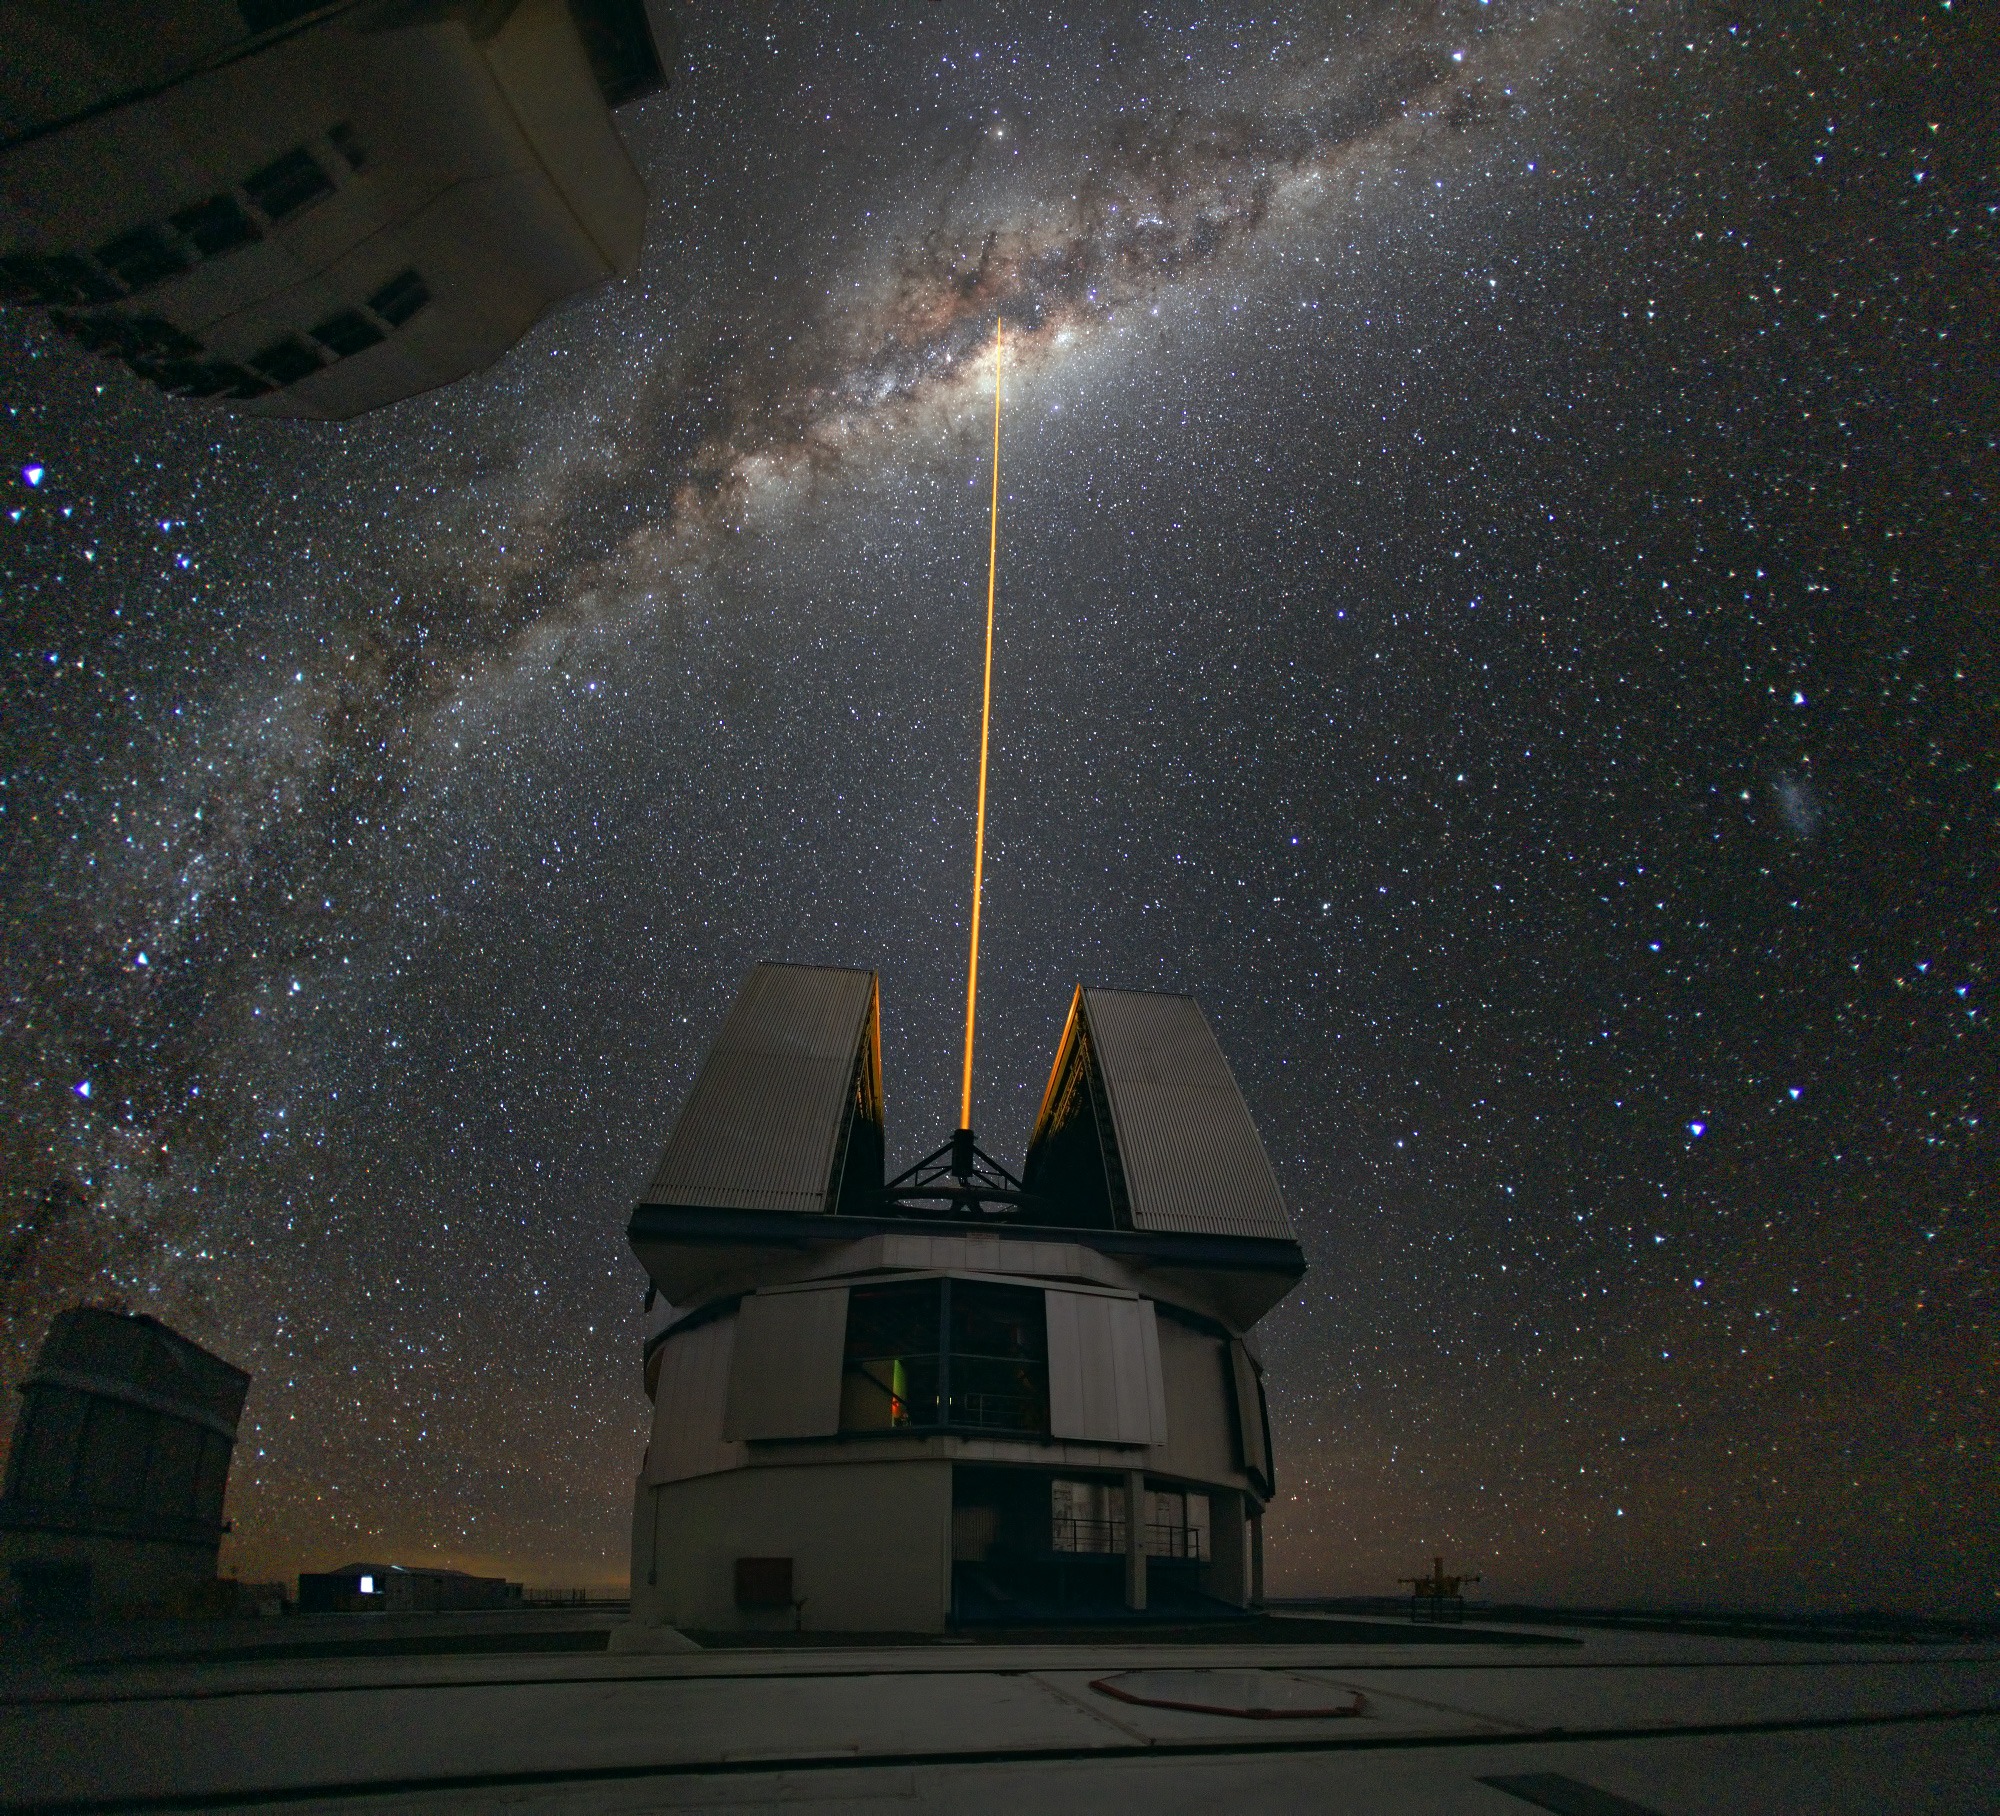 A laser beam towards the Milky Way's center emitted from an observatory with the Milky Way galaxy in the background.